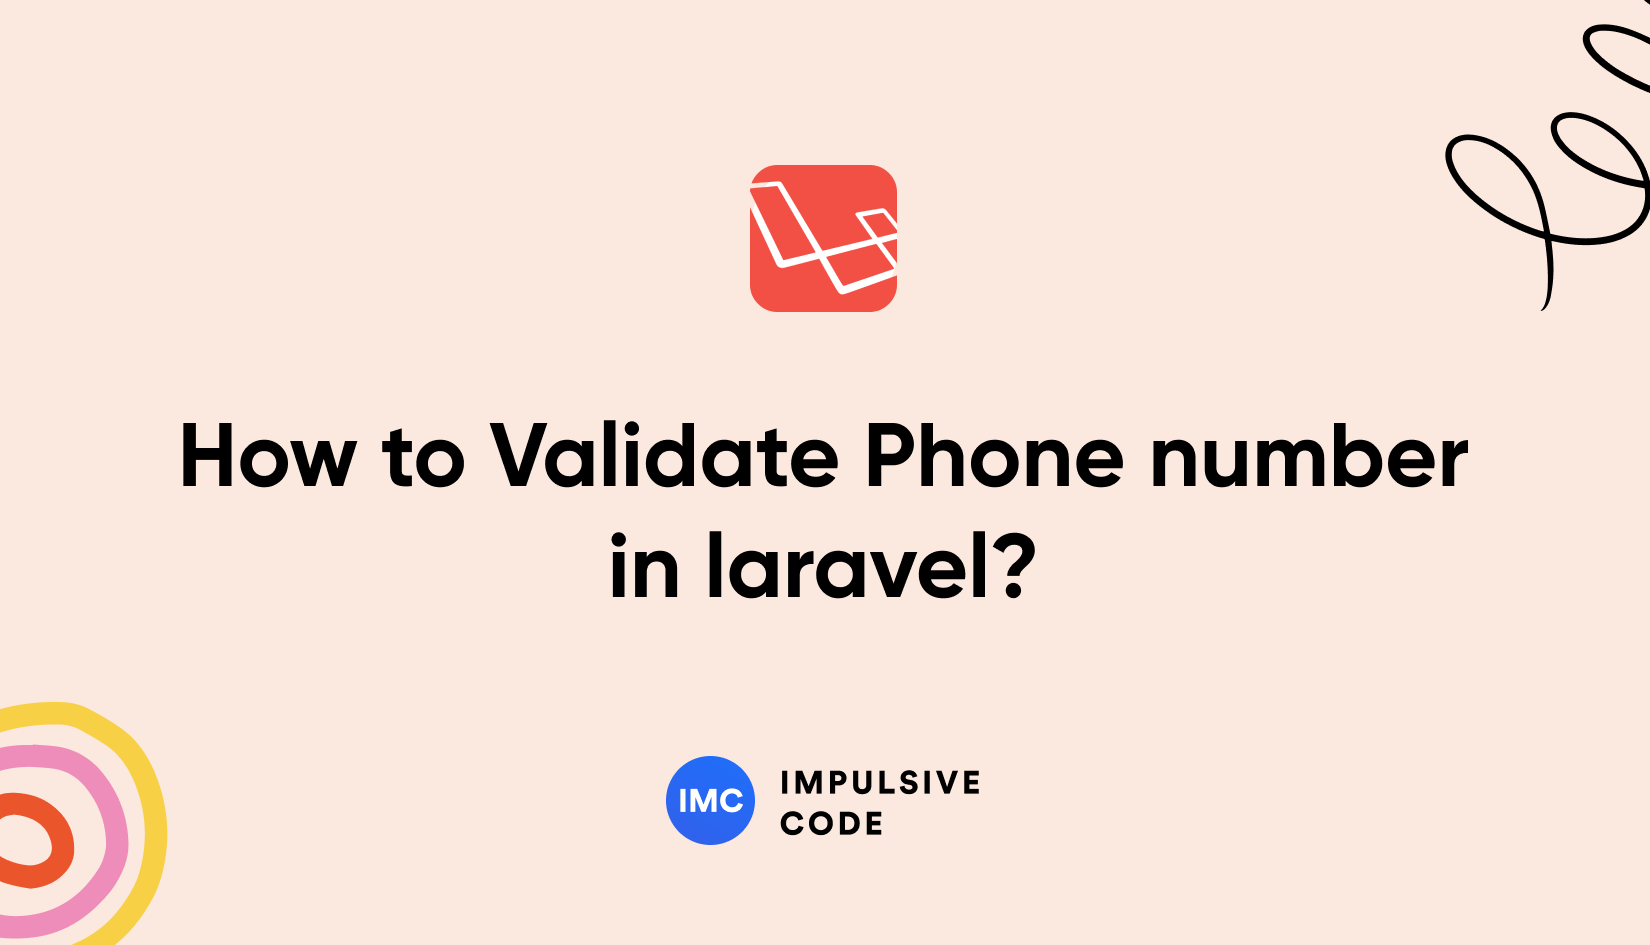 How to Validate Phone number in laravel?